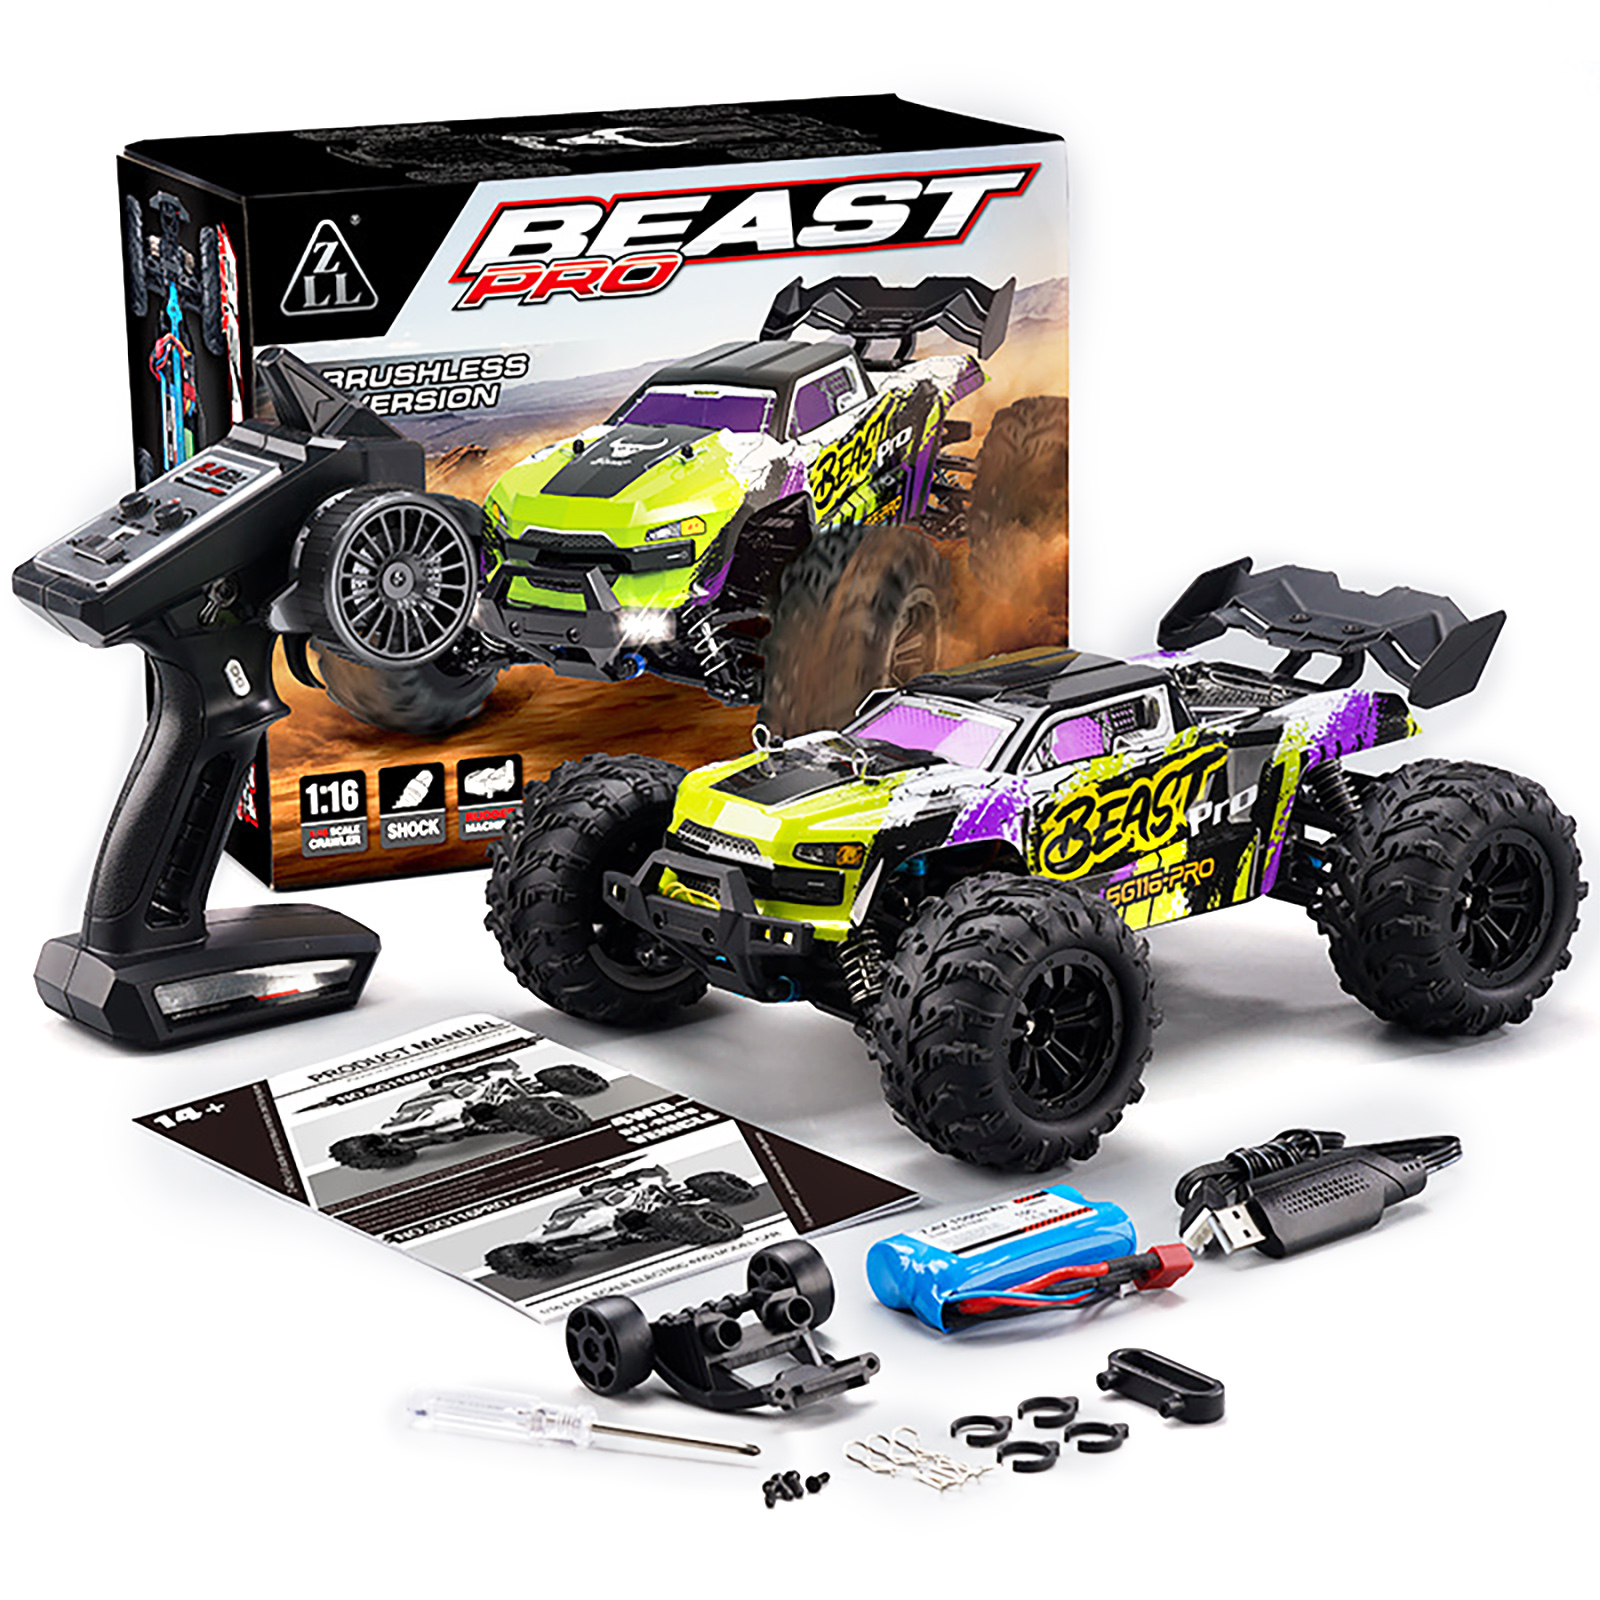 1:16 Scale Remote Control Car Brushless 4wd Off-Road Vehicle High-Speed Car Model Toys for Boys Gifts